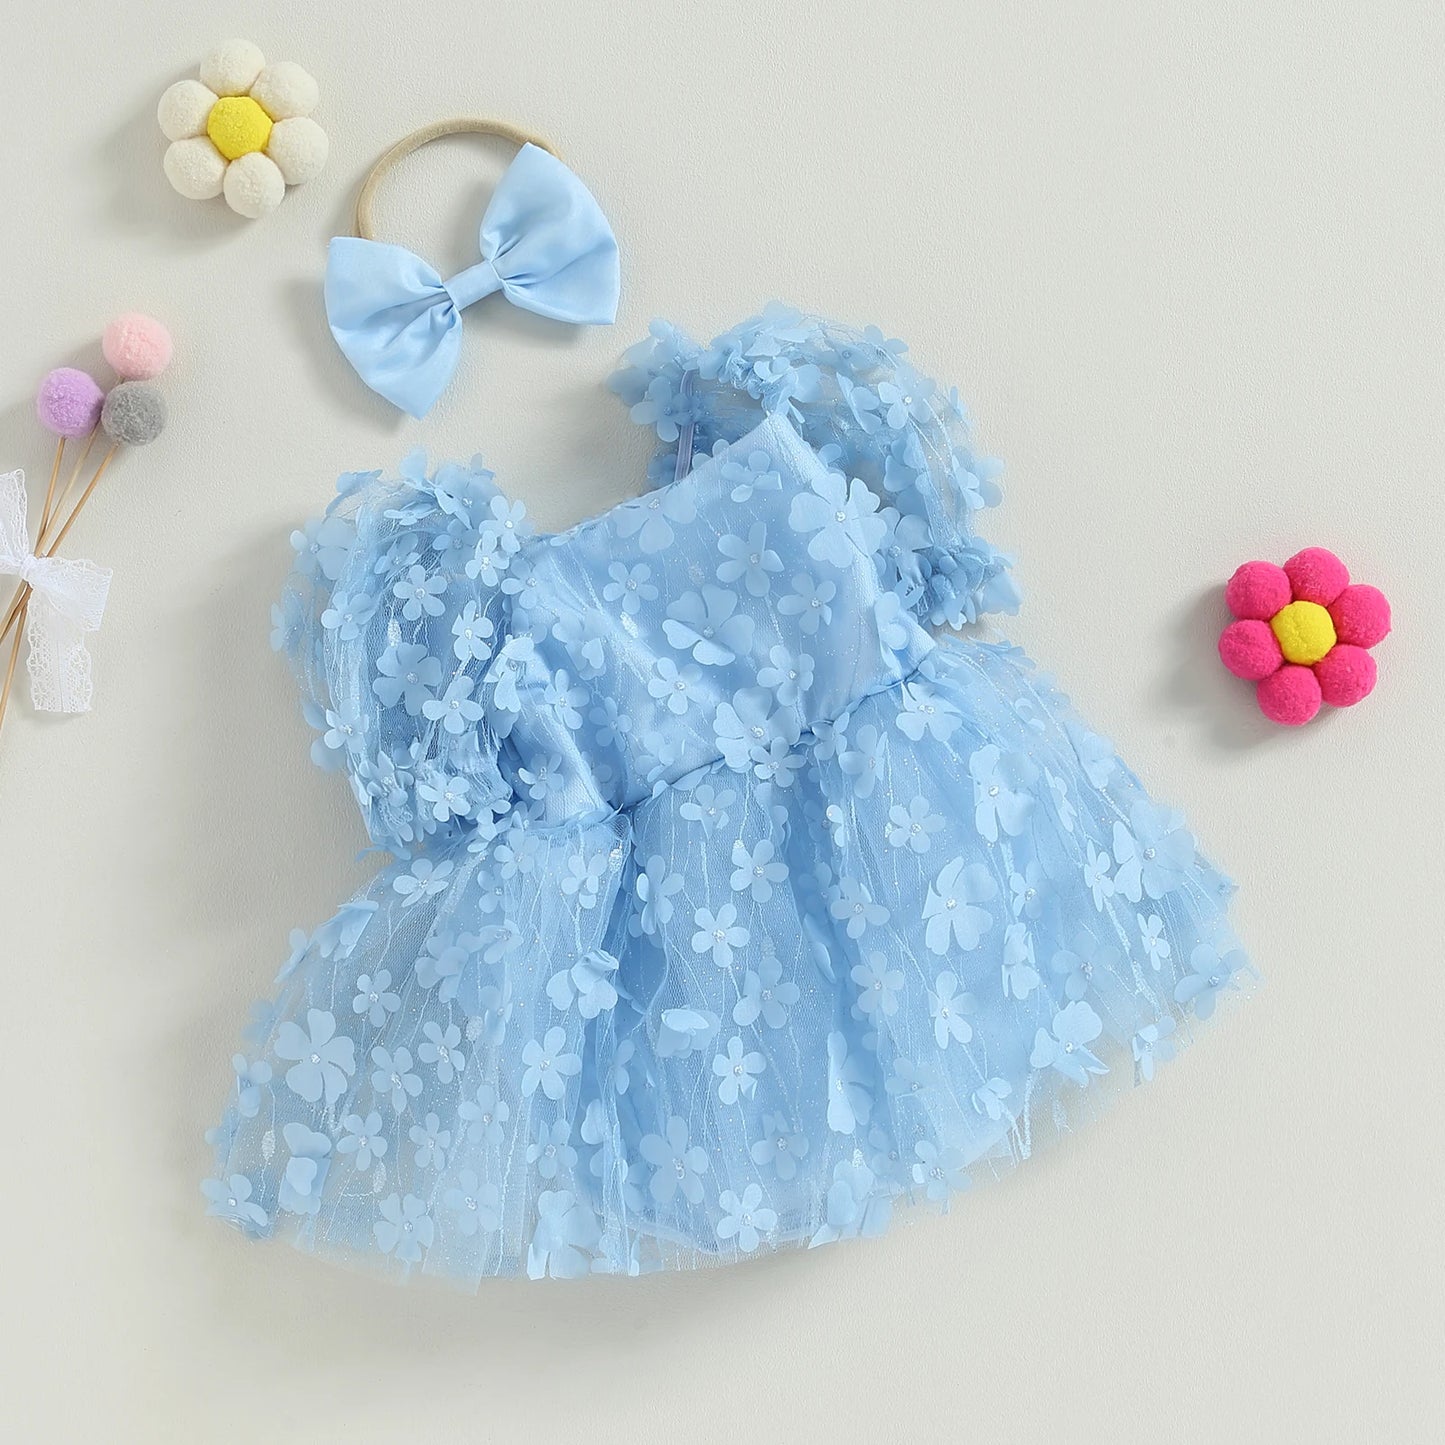 Pudcoco Infant Newborn Baby Girl 2 Piece Outfits Flower Short Sleeve Romper Dress with Cute Headband Set Summer Clothes 0-18M